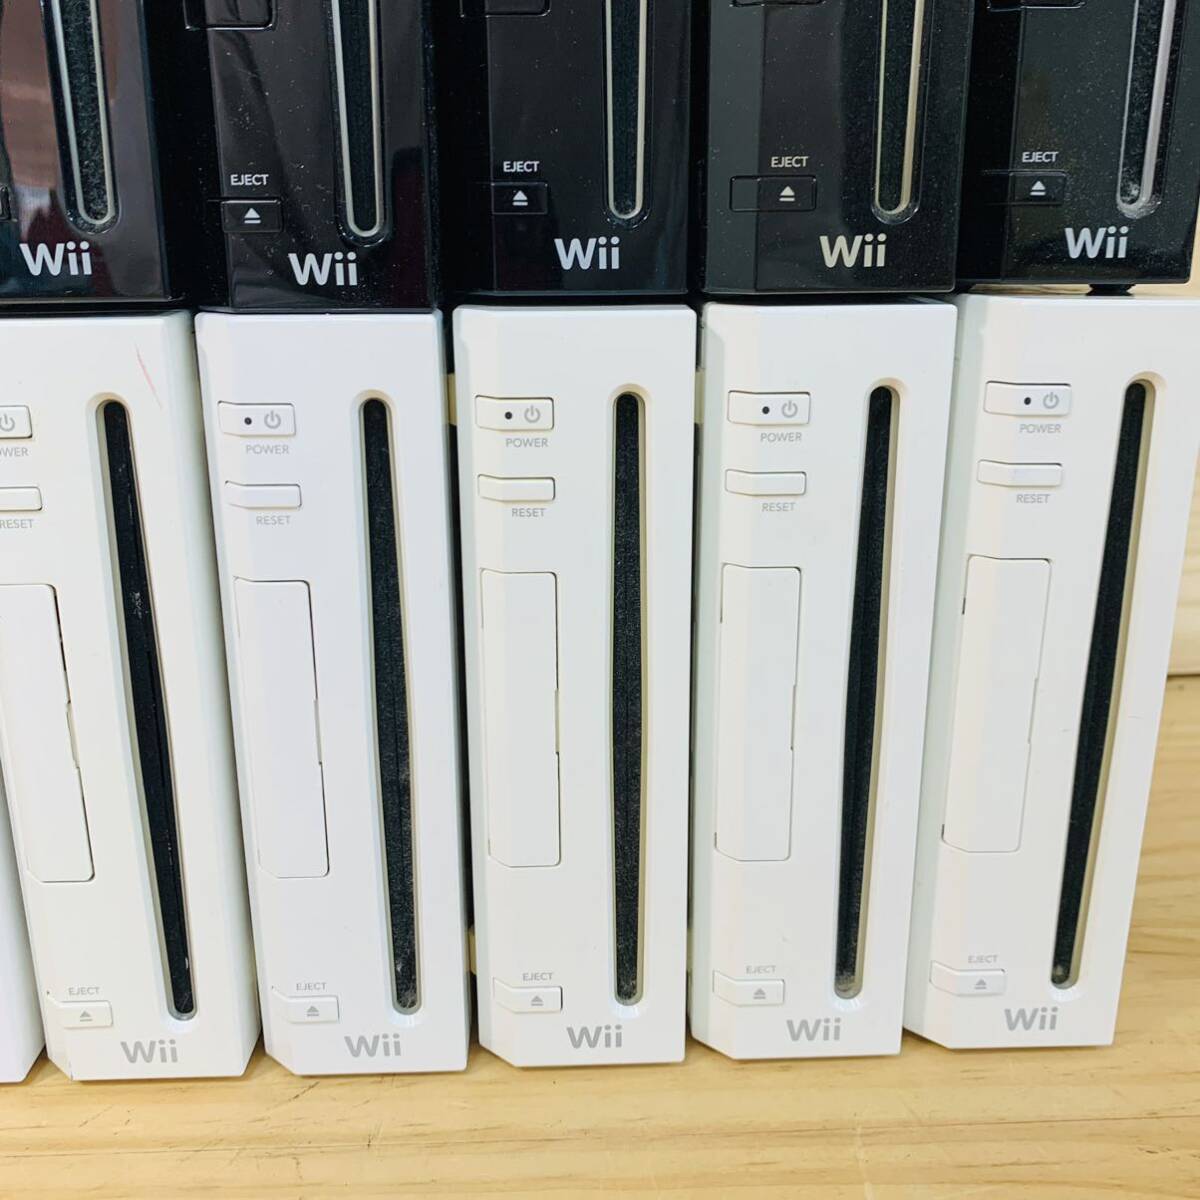 AAG28973 まとめ売り ジャンク品 Wii 本体 20台セット_画像5